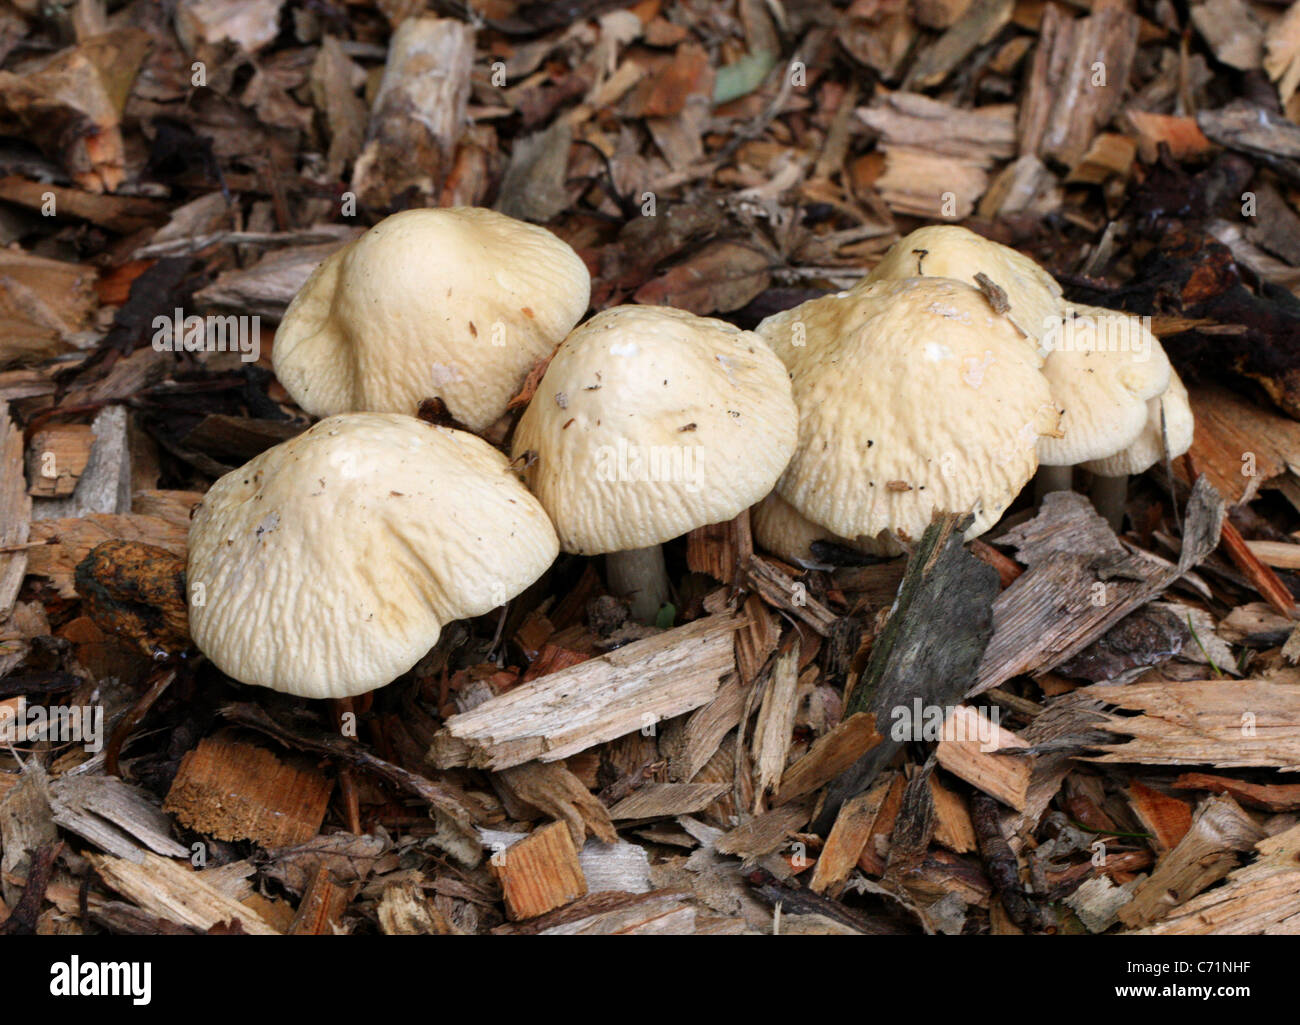 Agrocybe rivulosa, Strophariaceae (formerly Bolbitiaceae). An uncommon fungus, first identified in England in 2004. Stock Photo